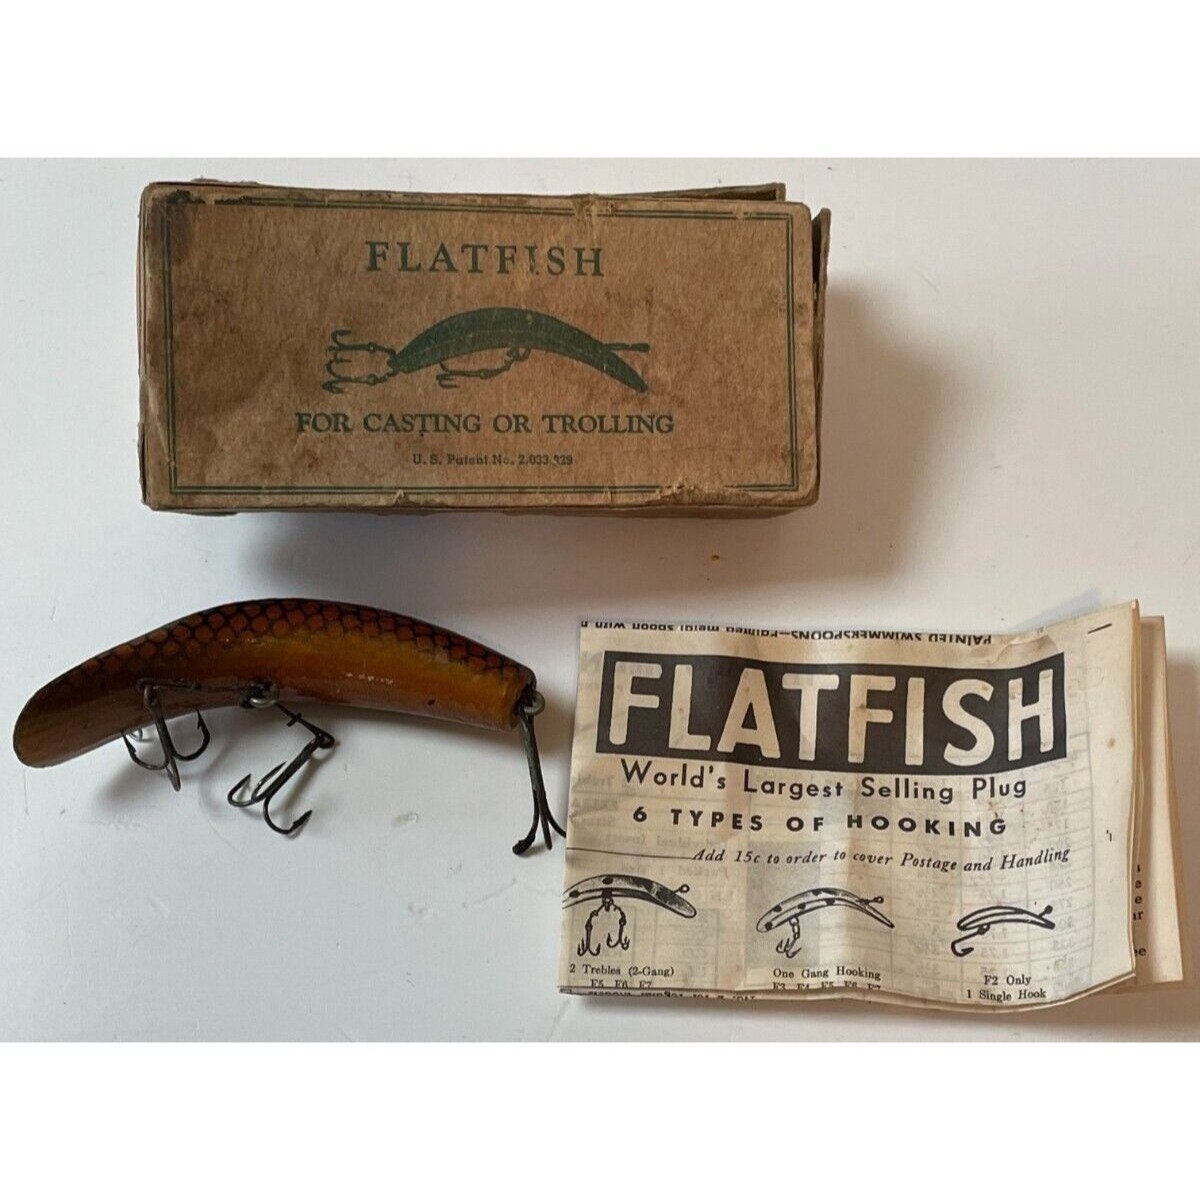 Vintage Fishing Lure Flatfish Lure for Casting or Trolling Helin Tackle Co.  M 